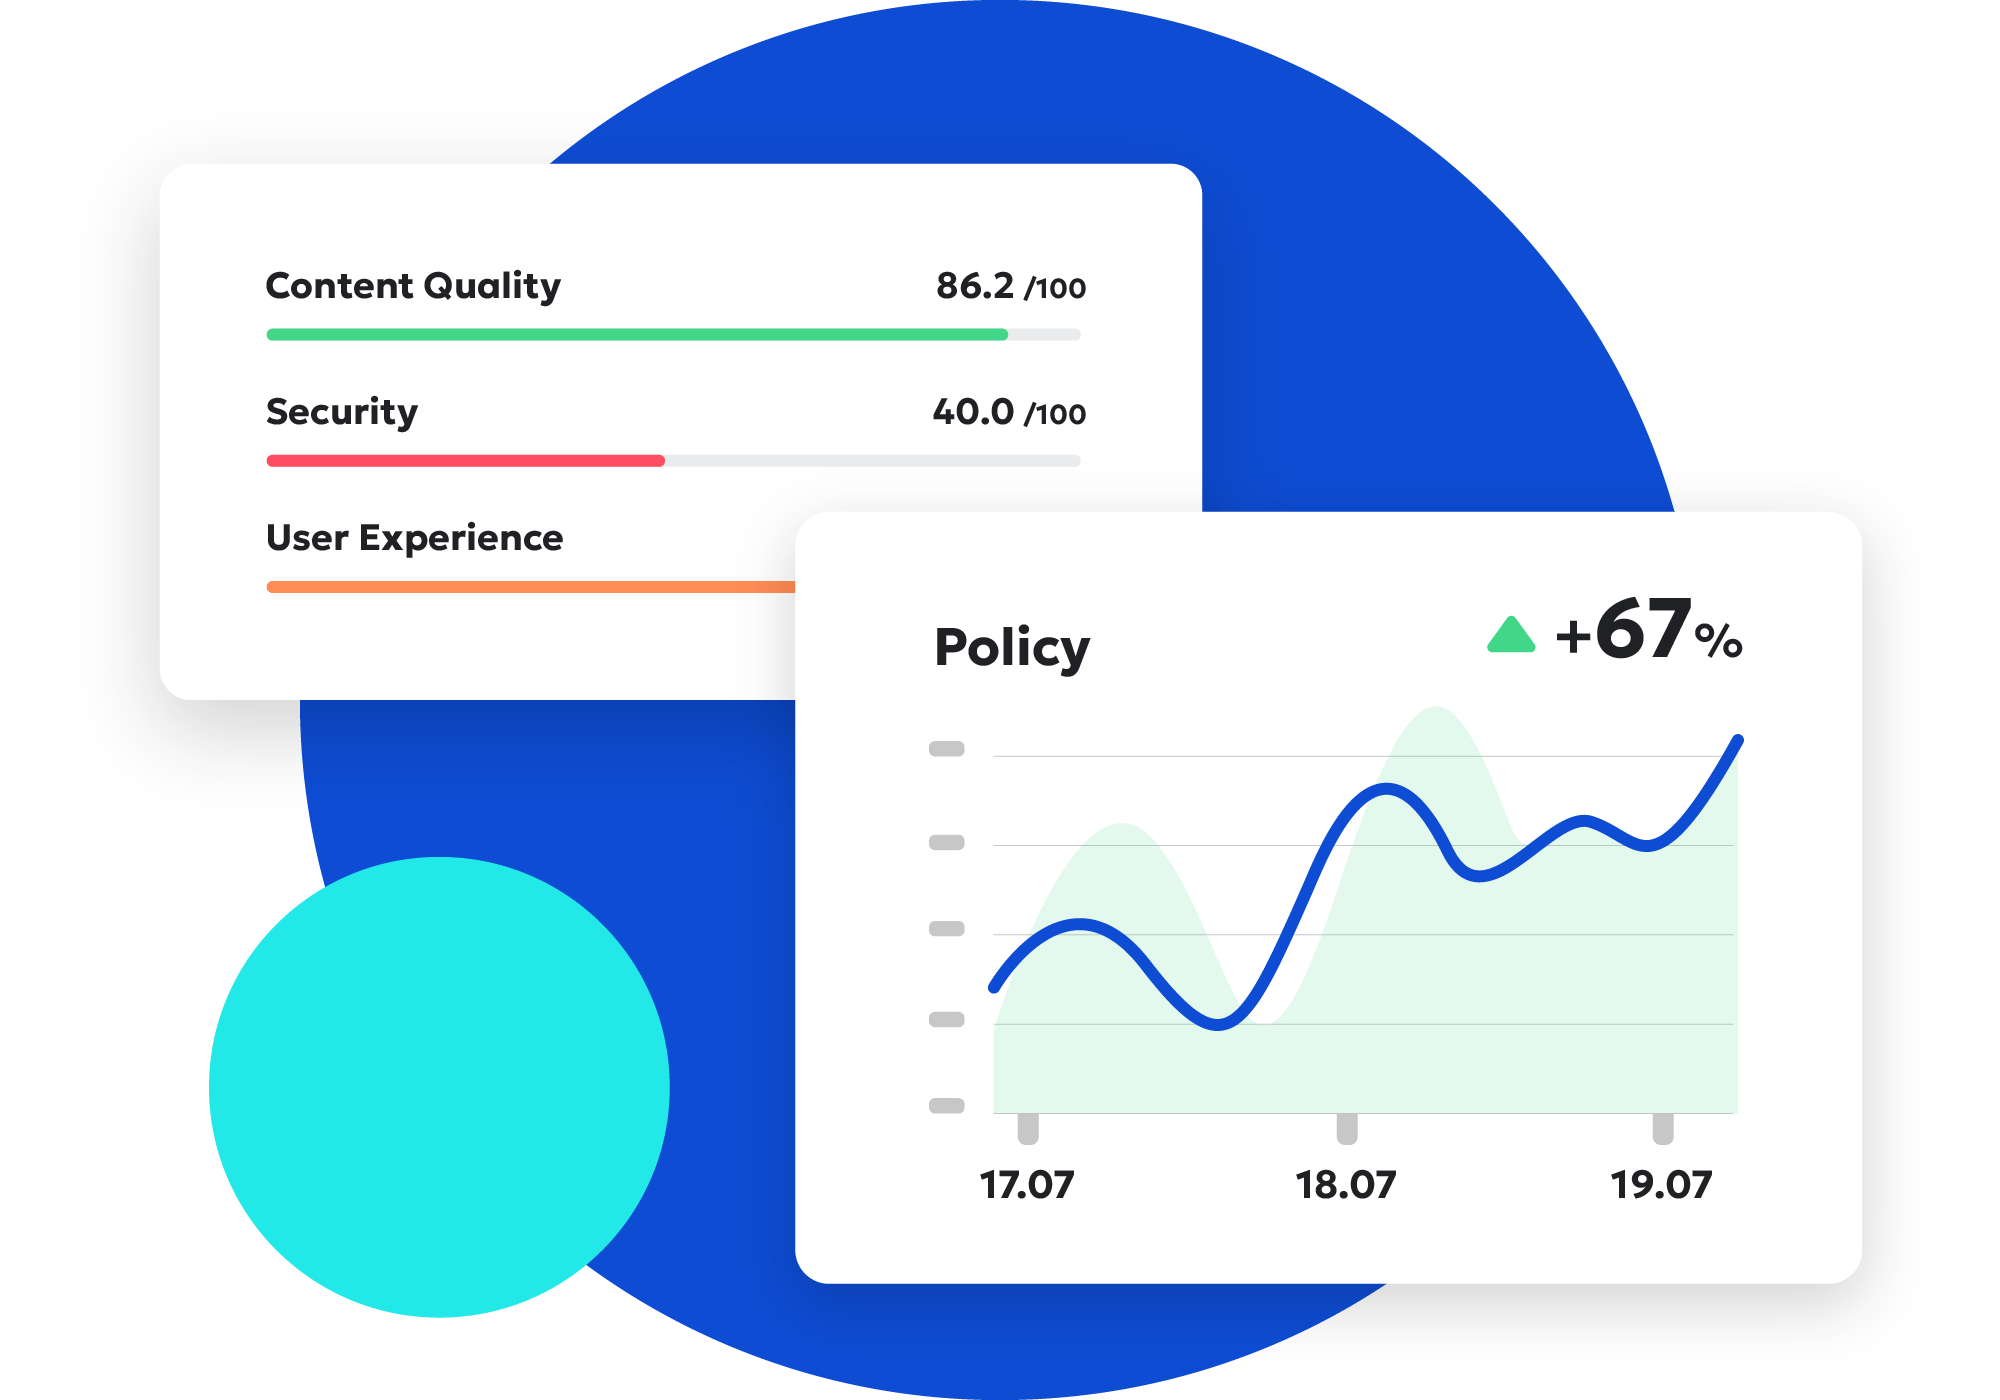 Dashboard showing 'Content Quality' at 86.2/100, 'Security' at 40.0/100, 'User Experience' with a performance bar, and a 'Policy' graph with a trend line indicating a 67% increase over a three-day period.